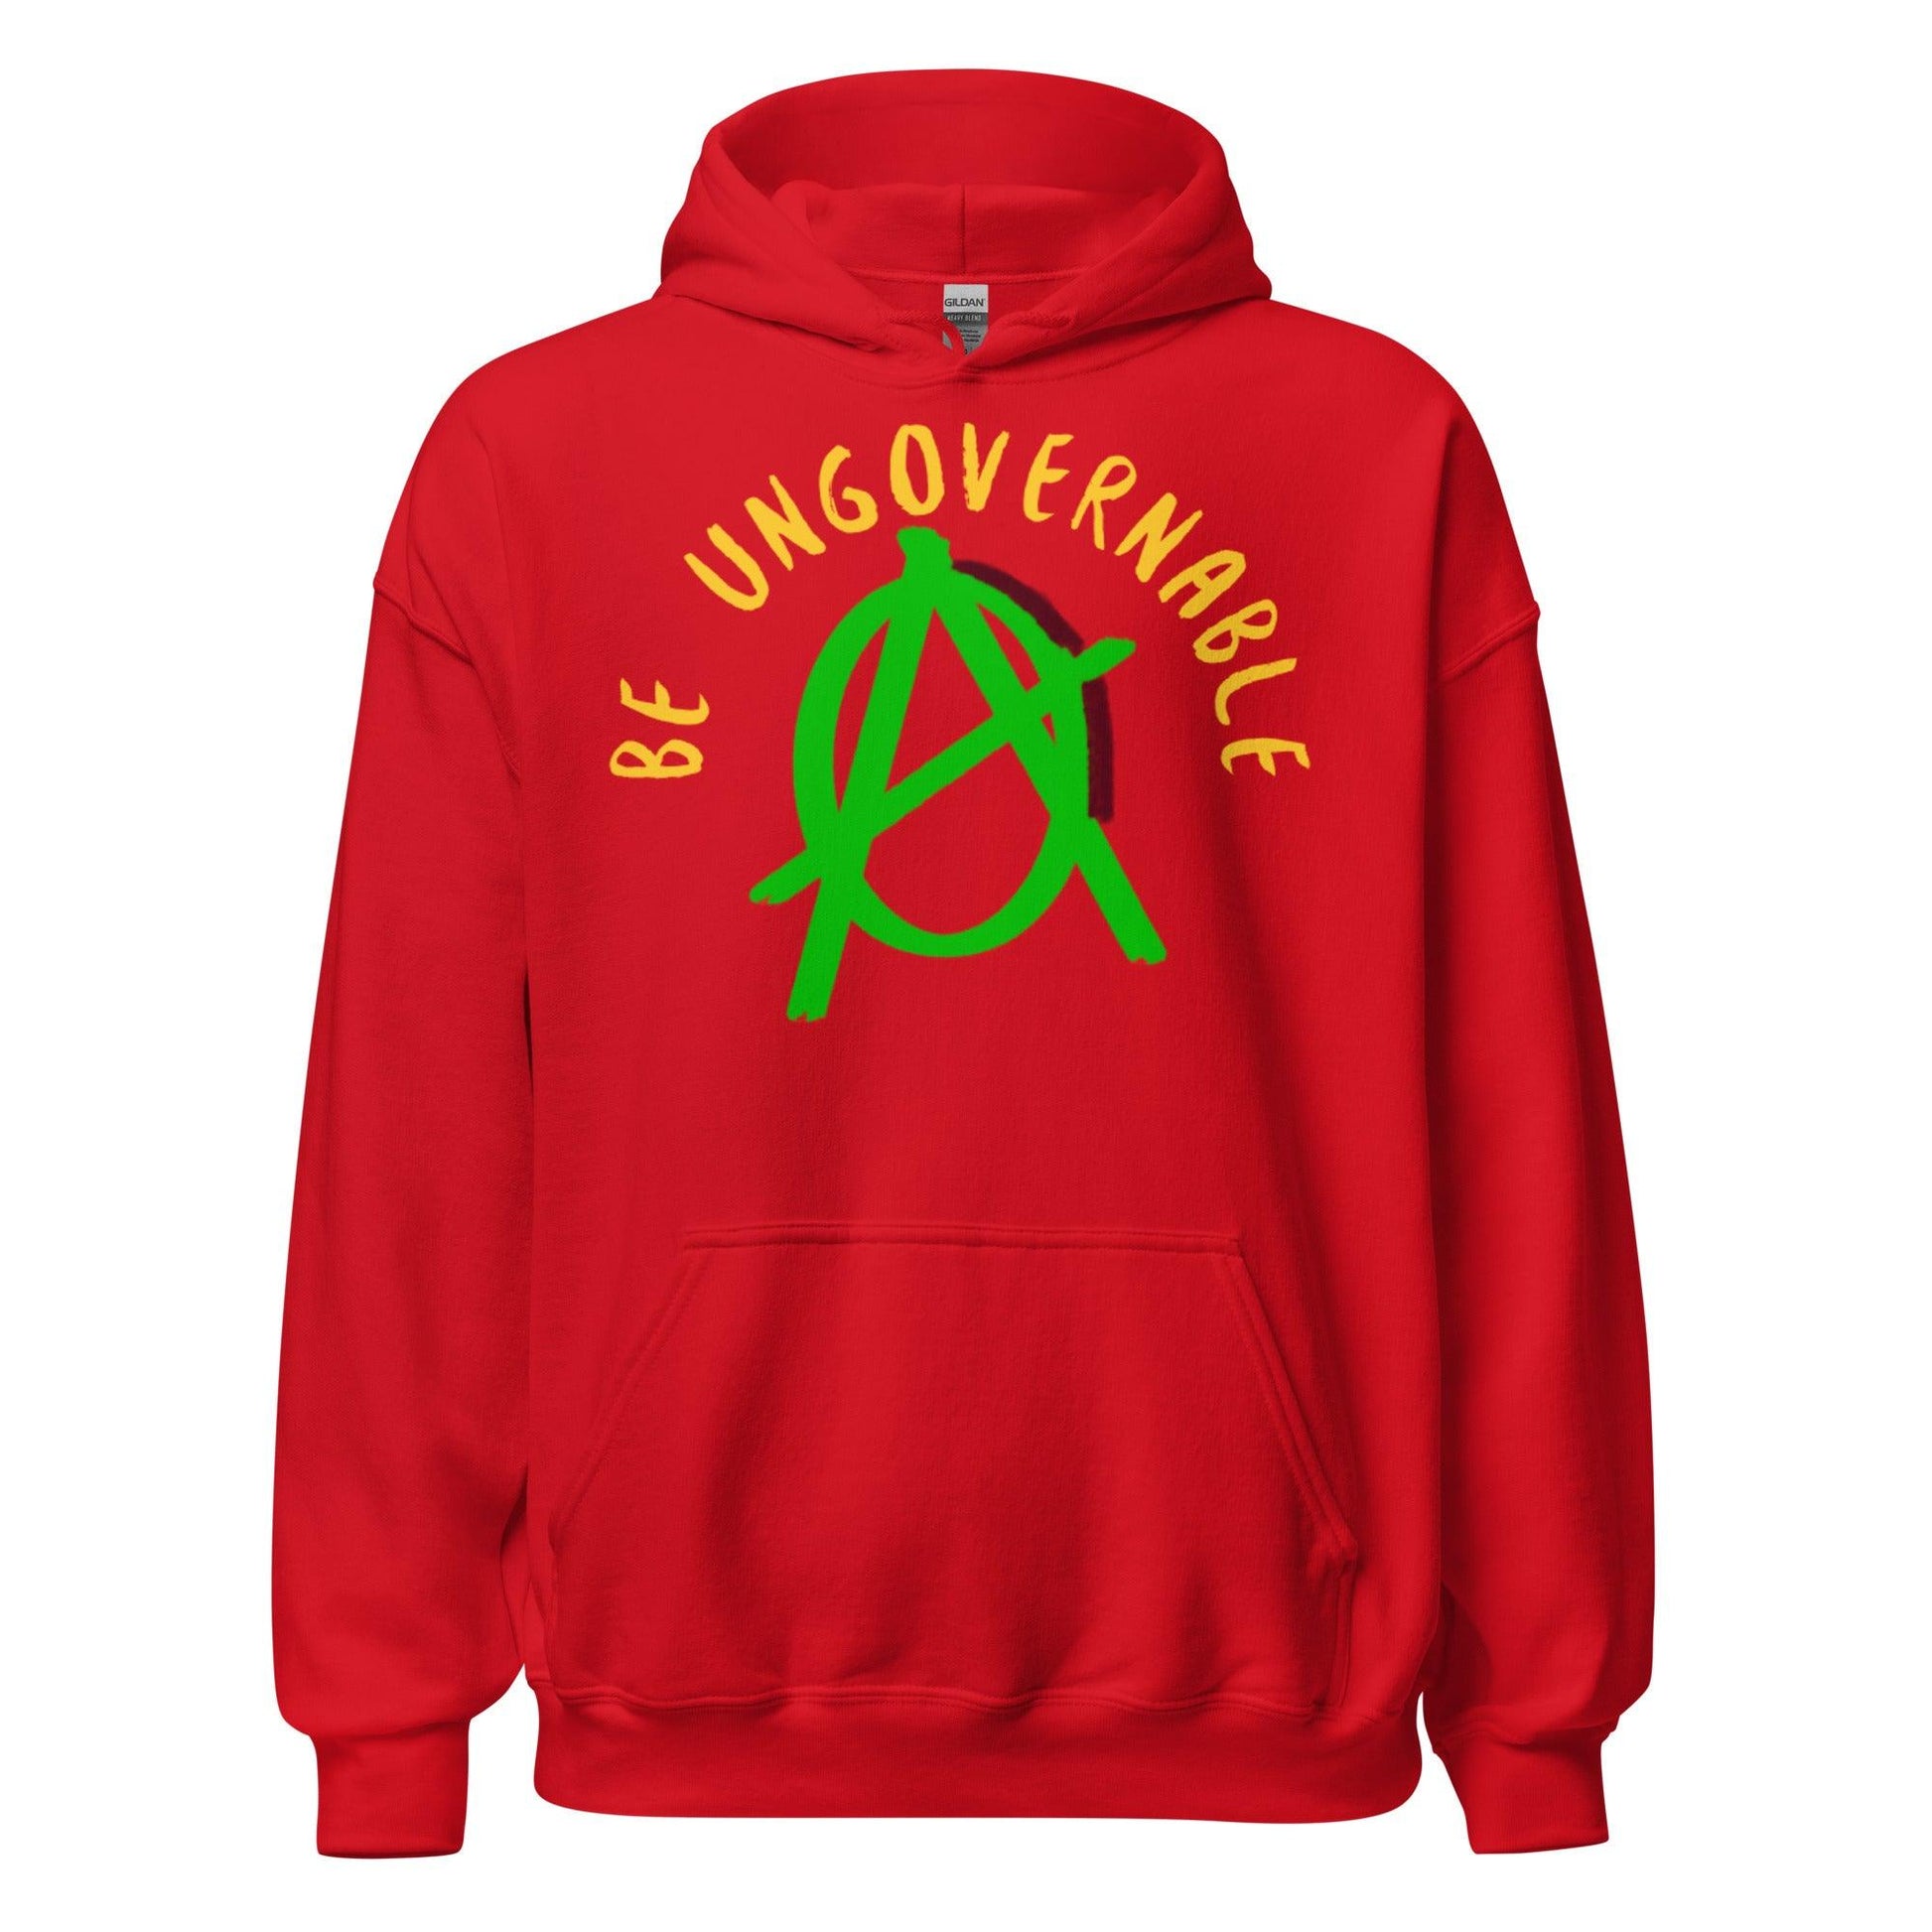 Anarchy Wear Green "Be Ungovernable" Hoodie - AnarchyWear